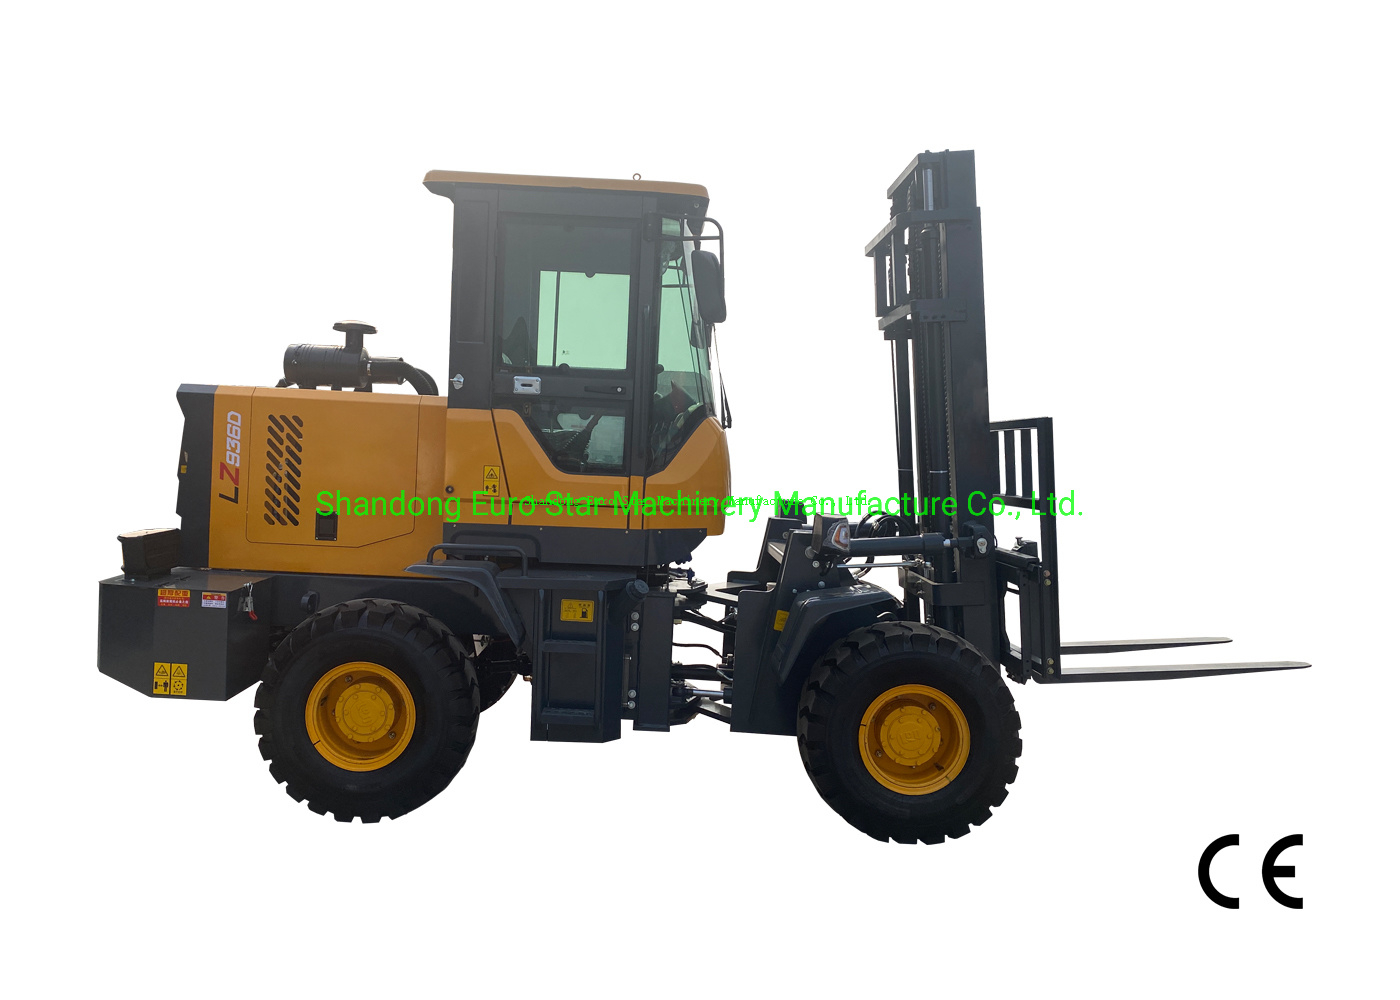 1-6t-Ez936-Wheel-Loader-Multi-Functional-Mini-Small-CE-Approved-China-Farm-Construction-Medium-Bucket-Machinery-Compact-Backhoe-Excavator-Front-End-Loader (3).jpg